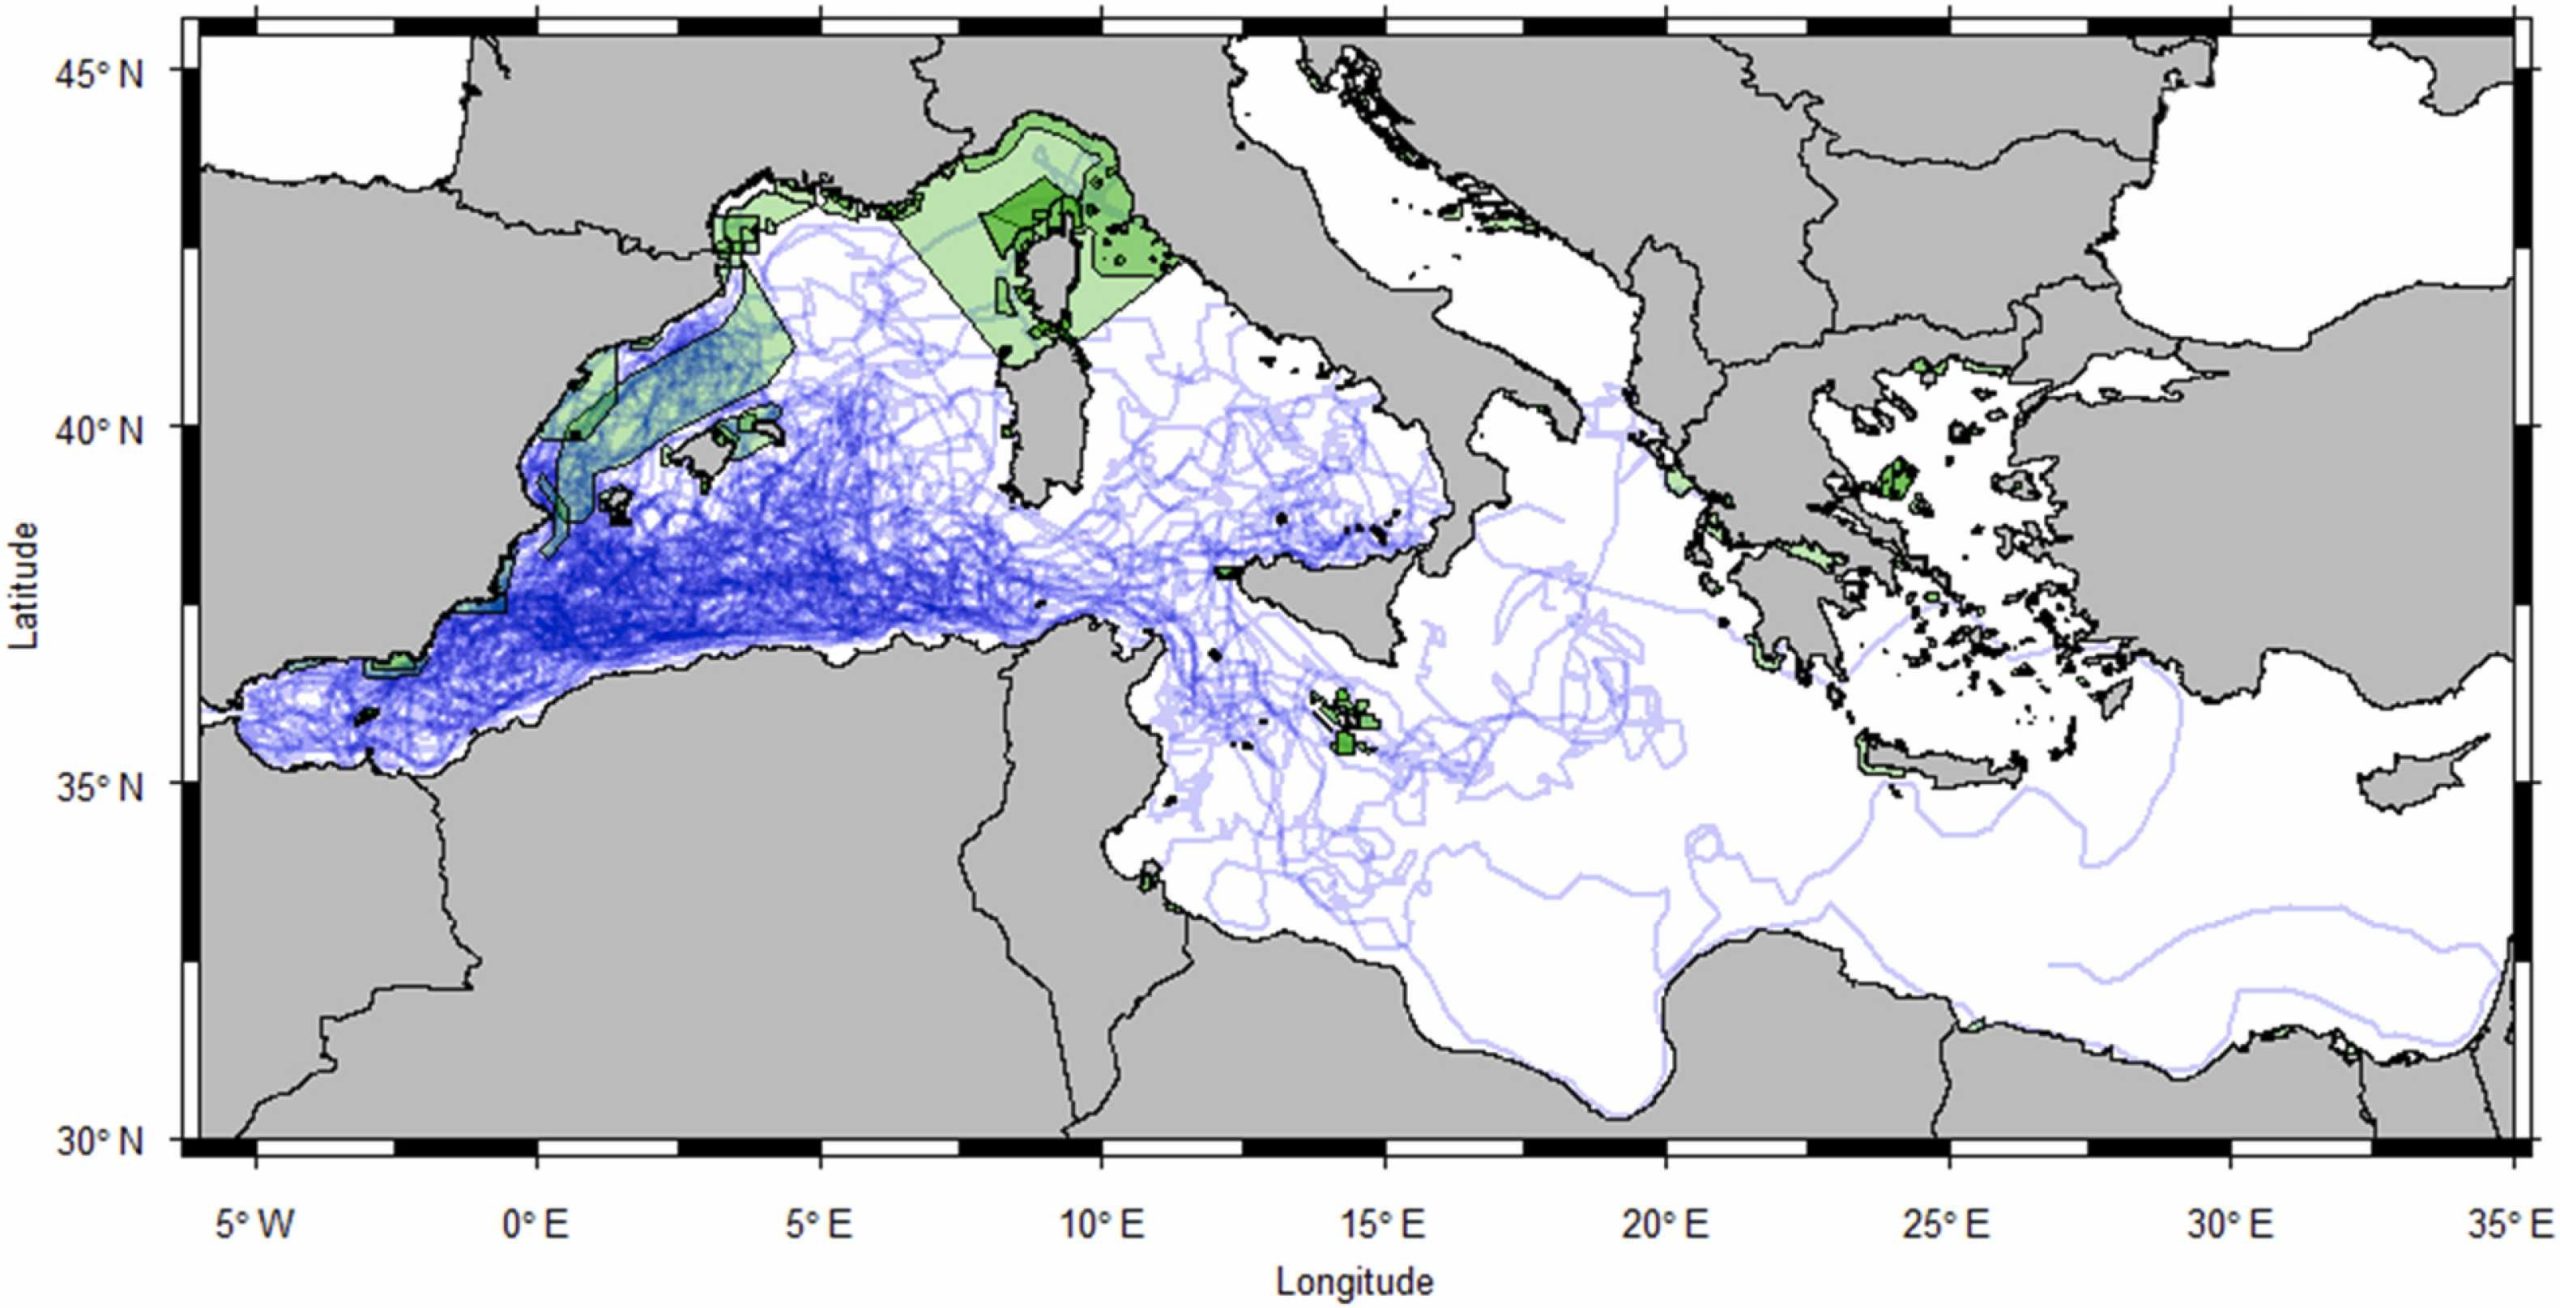 Turtle trajectories and marine protected areas in the Mediterranean Sea